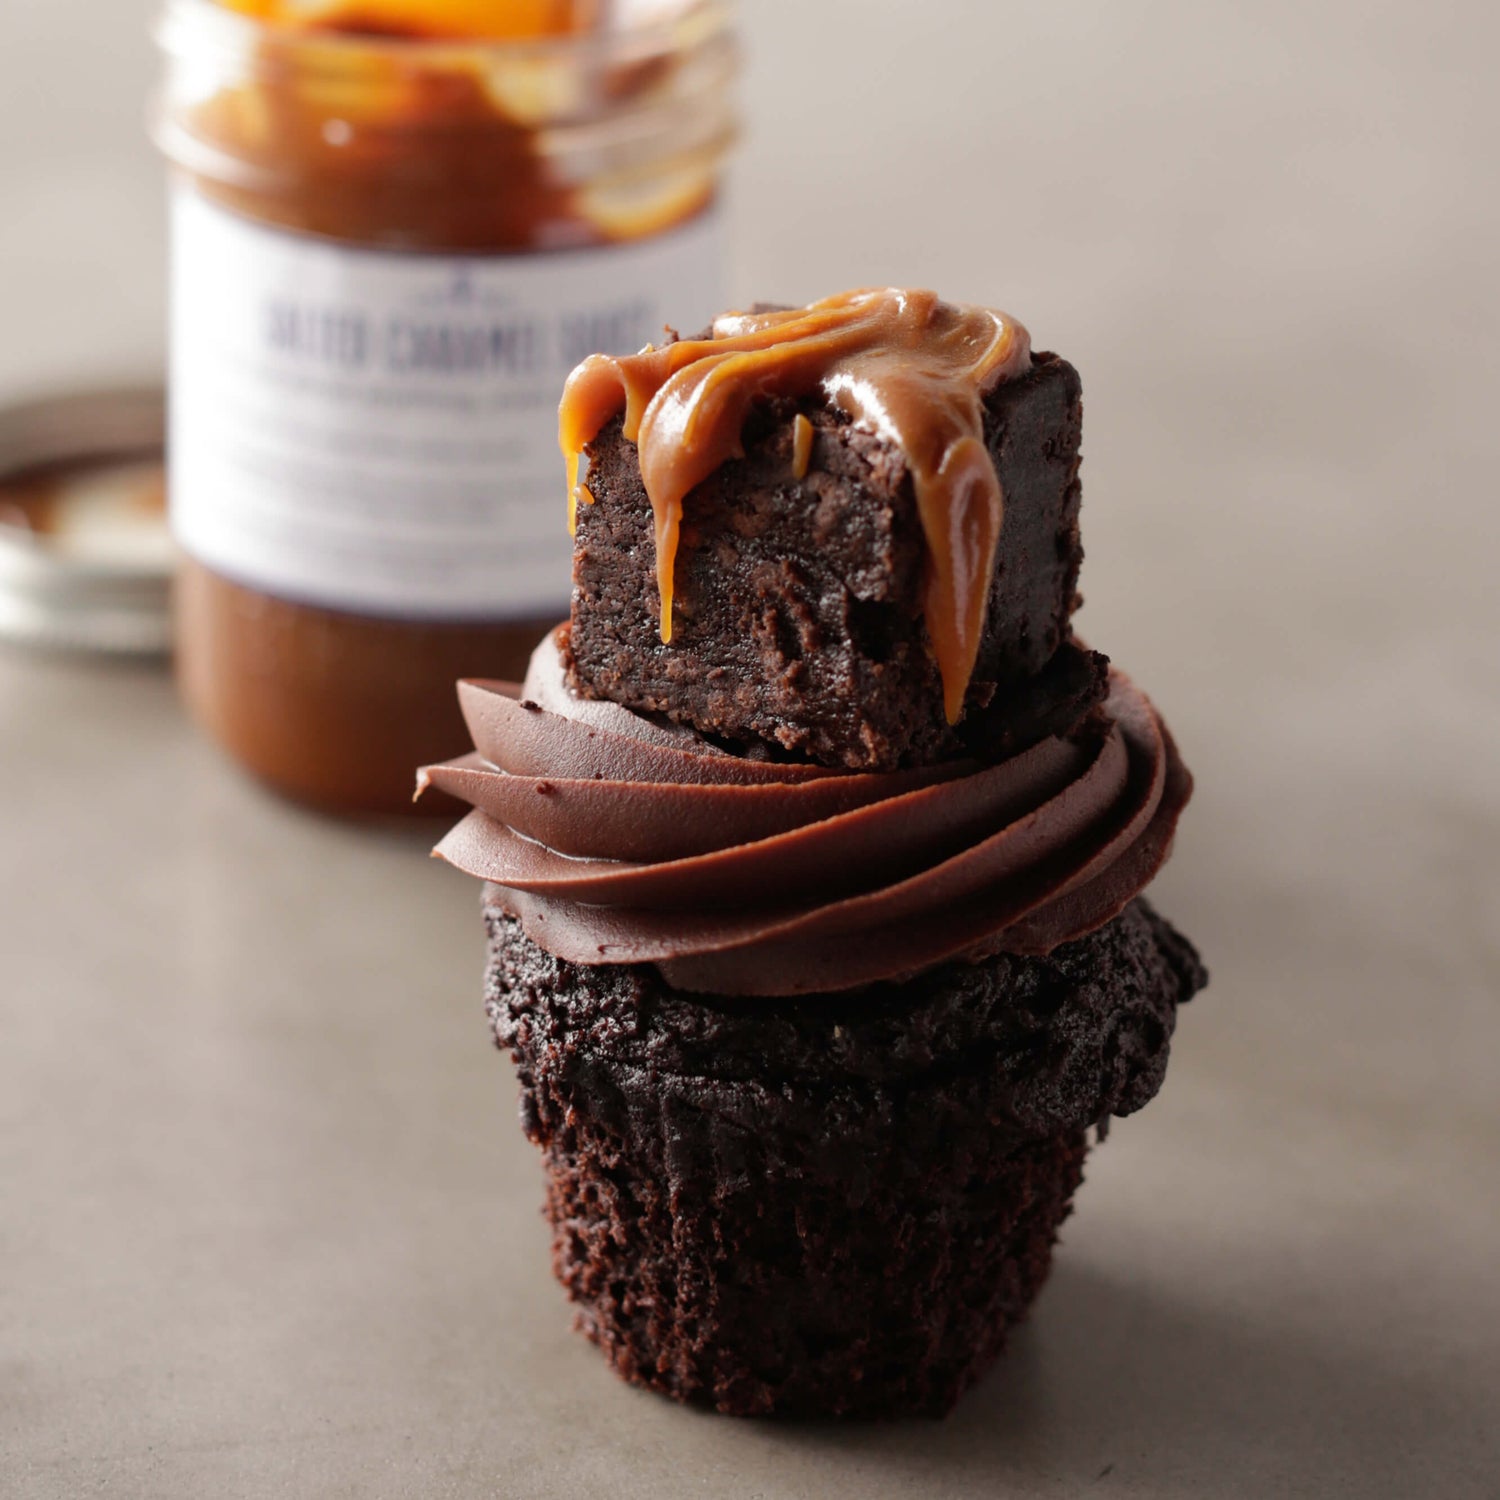 Gluten-Free Nut-Free Chocolate cupcake with brownie and salted caramel